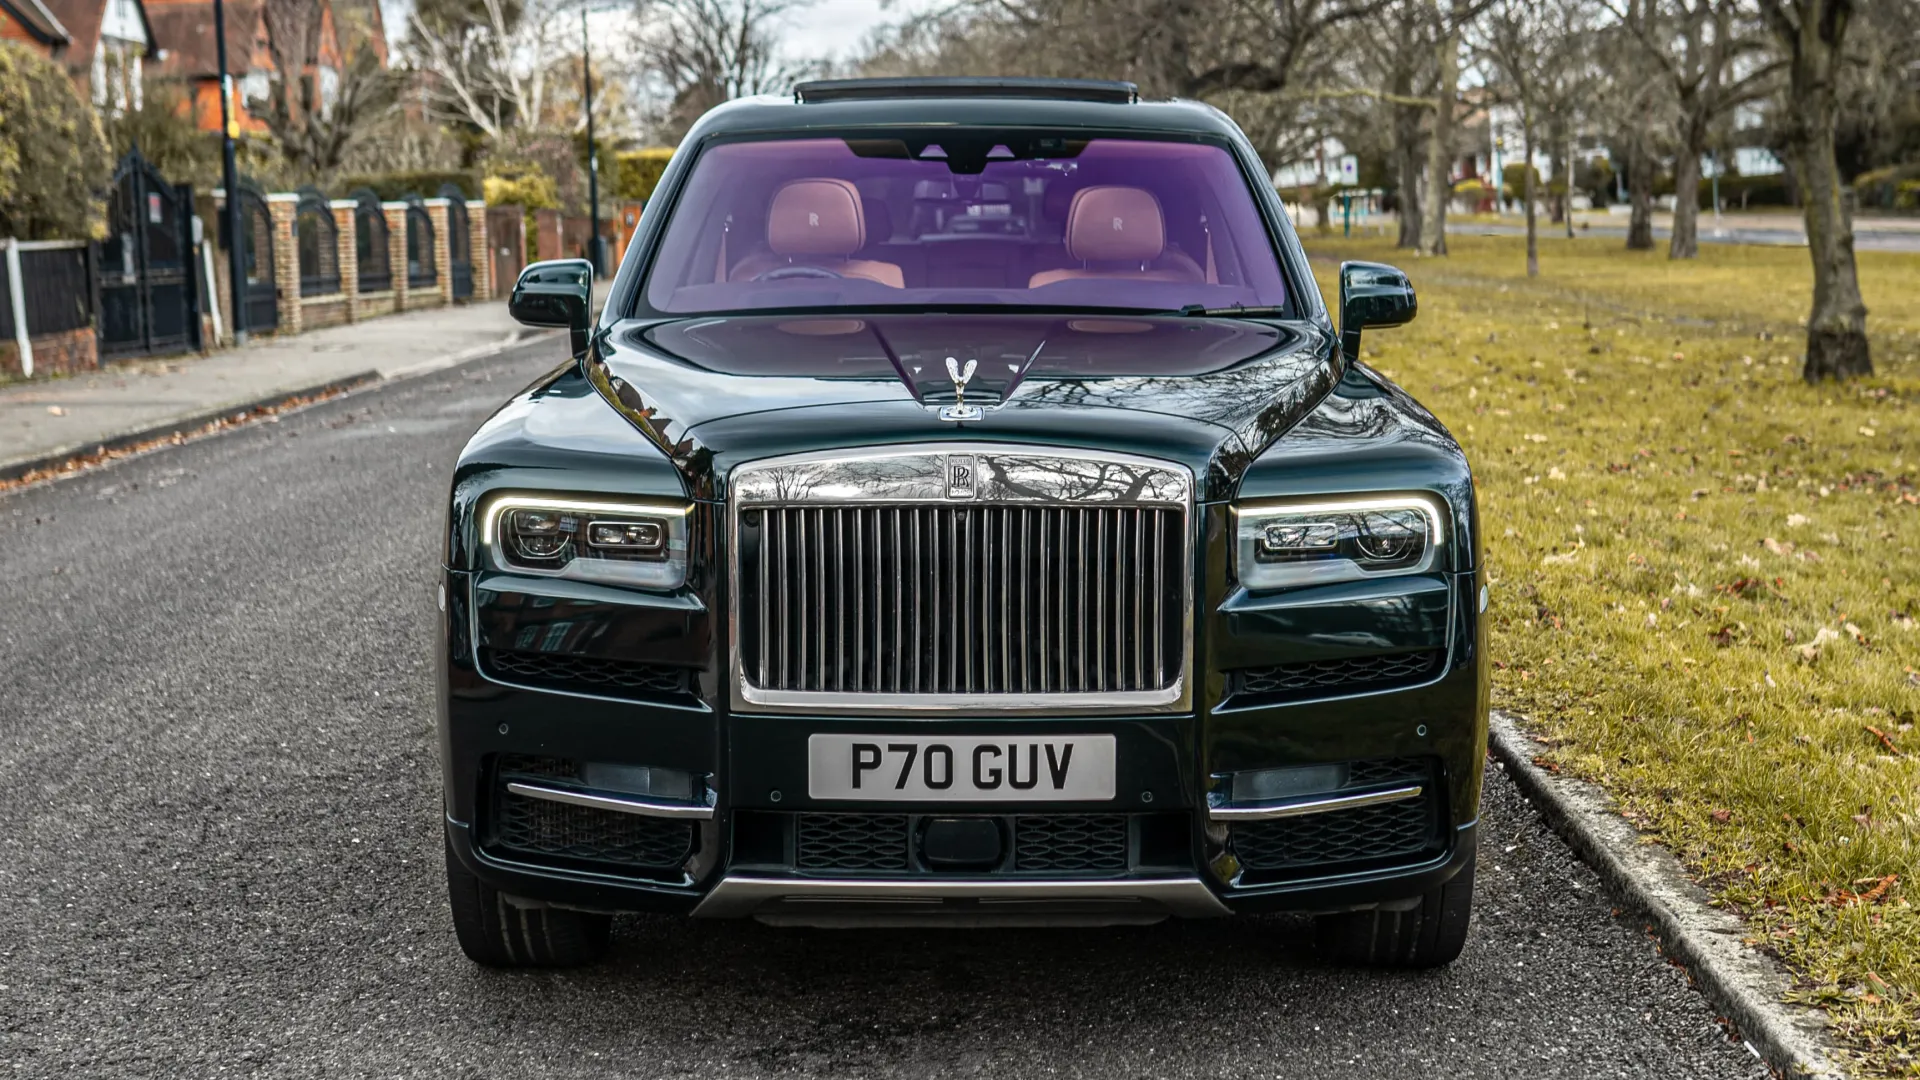 Full front view of Rolls-Royce Cullinan